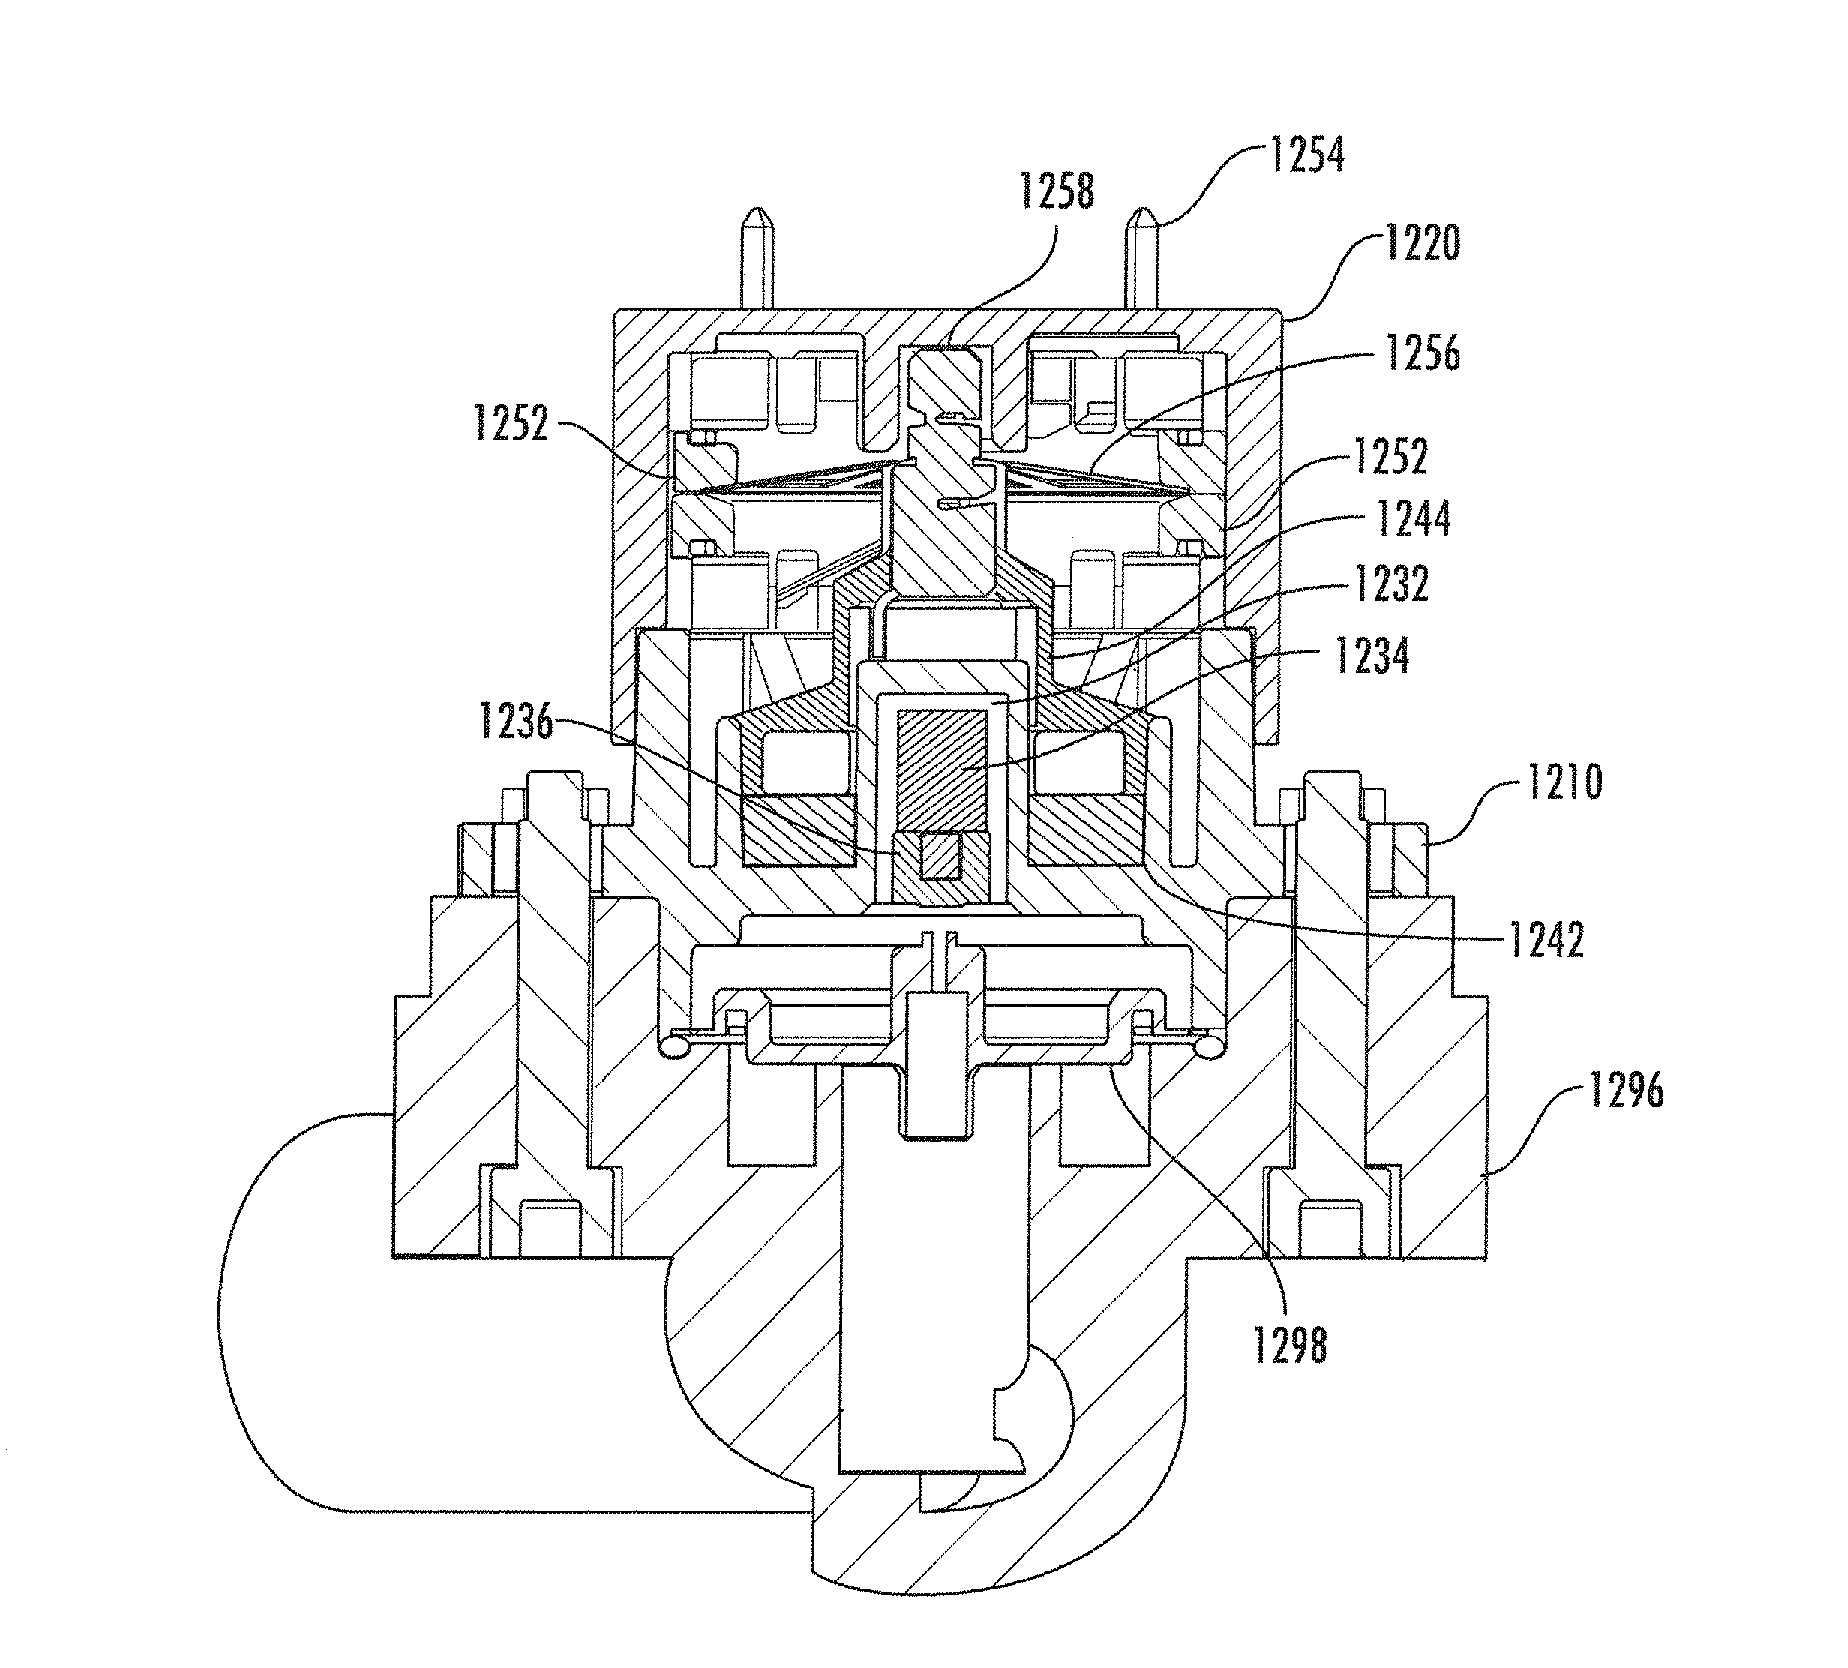 Memory alloy-actuated apparatus and methods for making and using the same